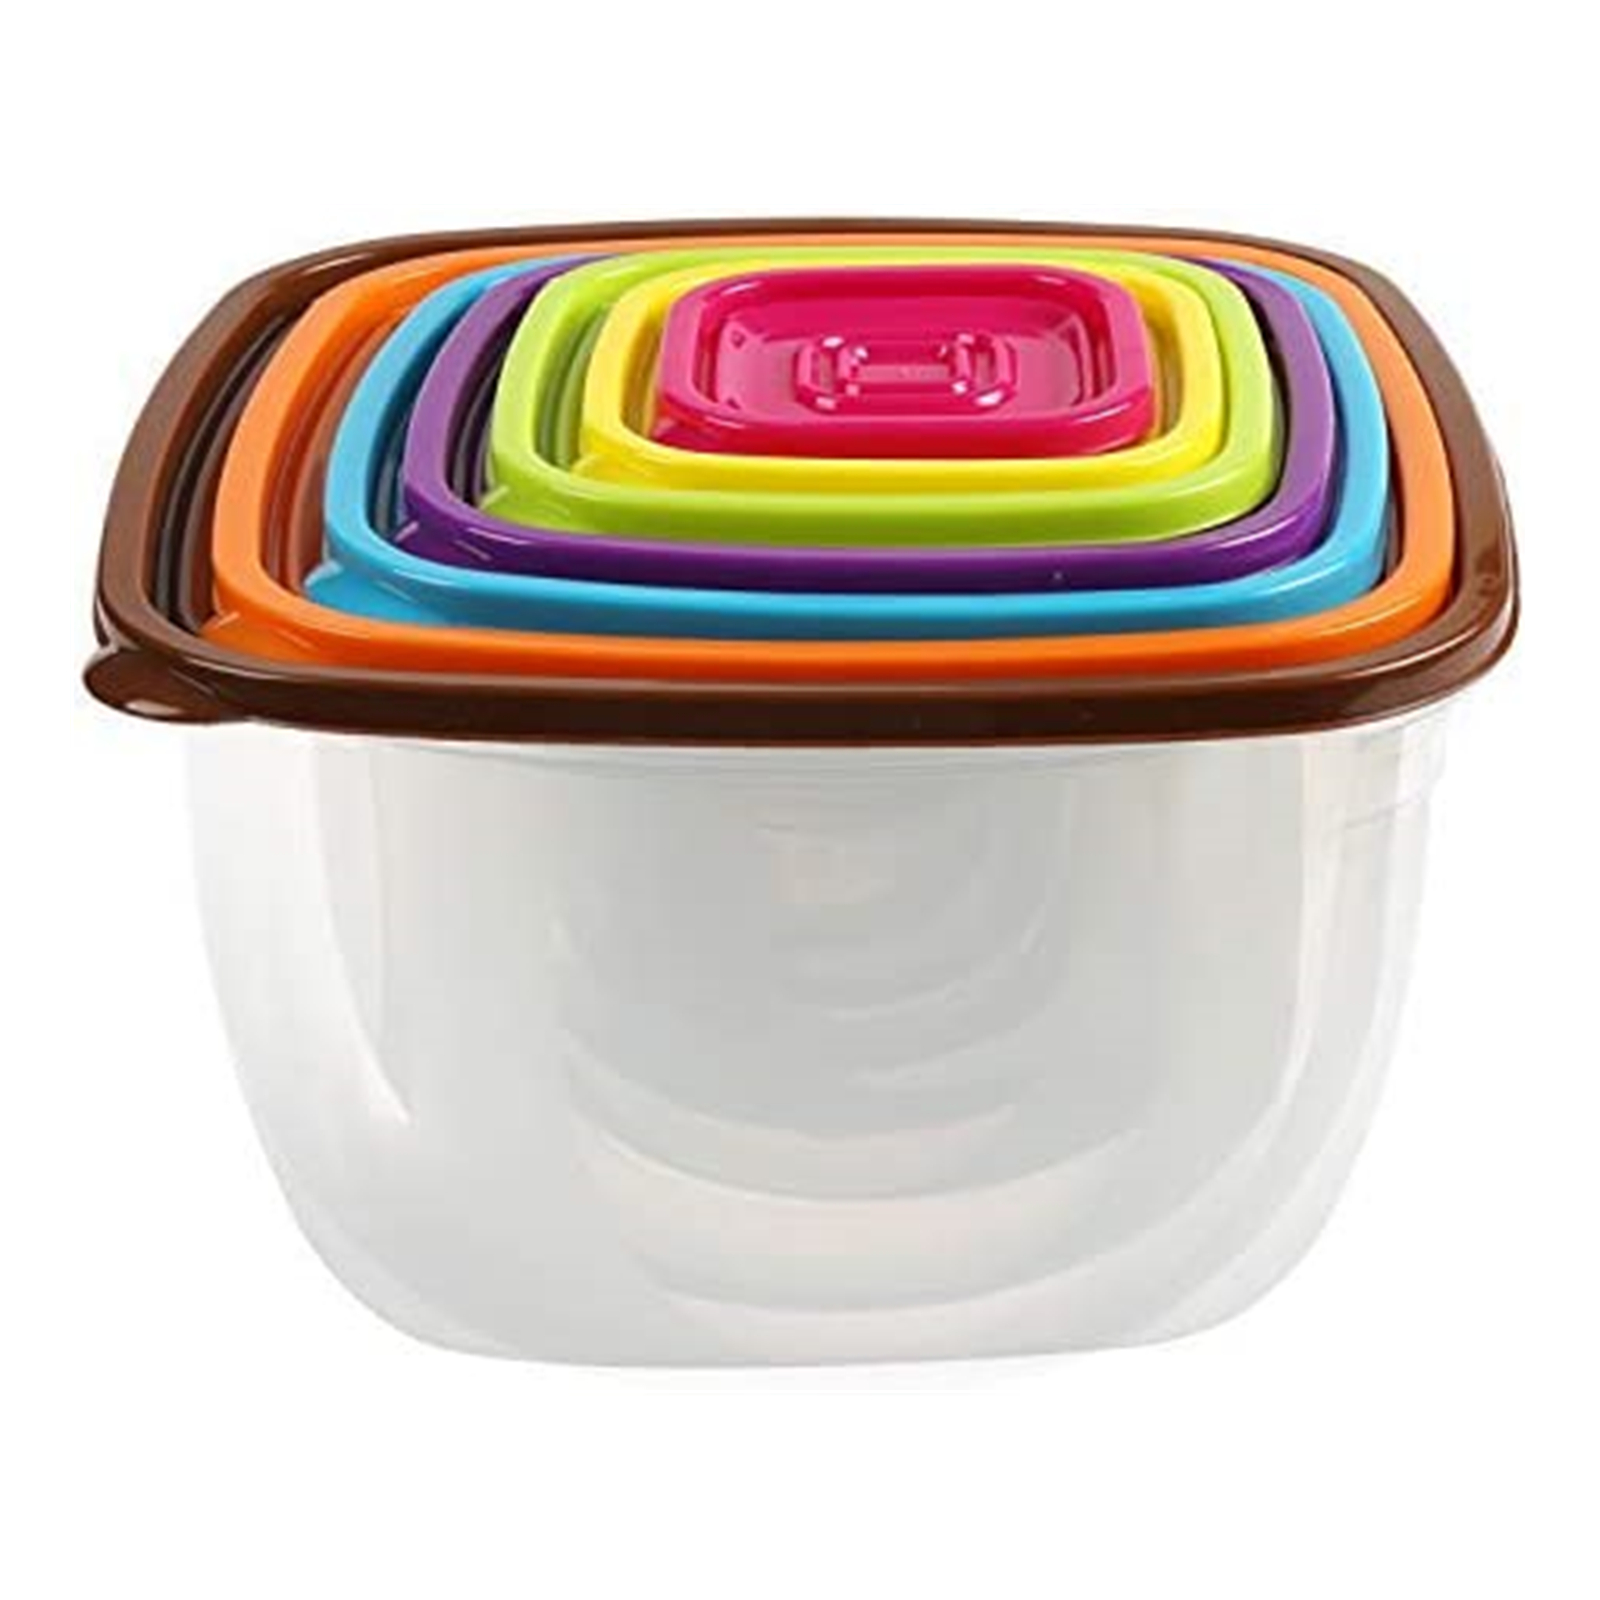 7pcs/set Rainbow-colored Food Storage Boxes For Students' Lunch